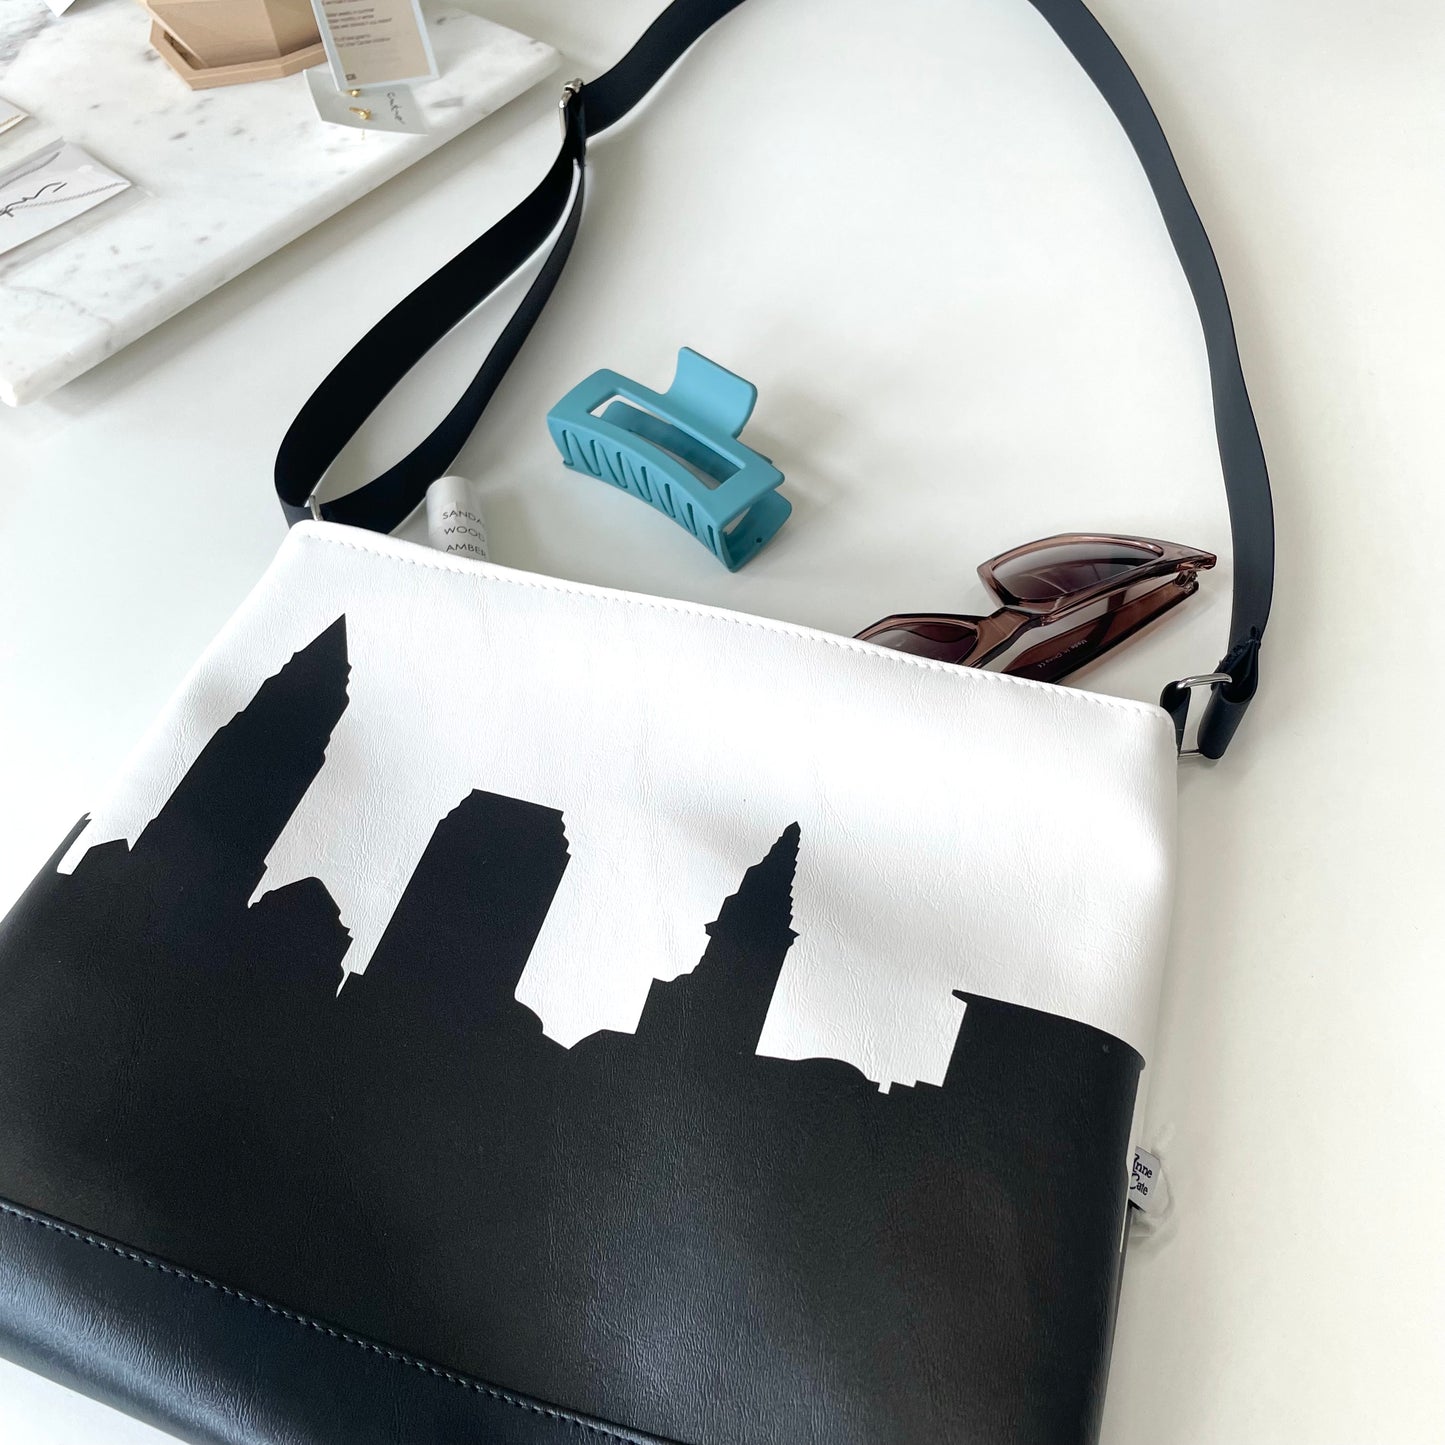 black and white skyline bag with sunglasses blue hair claw